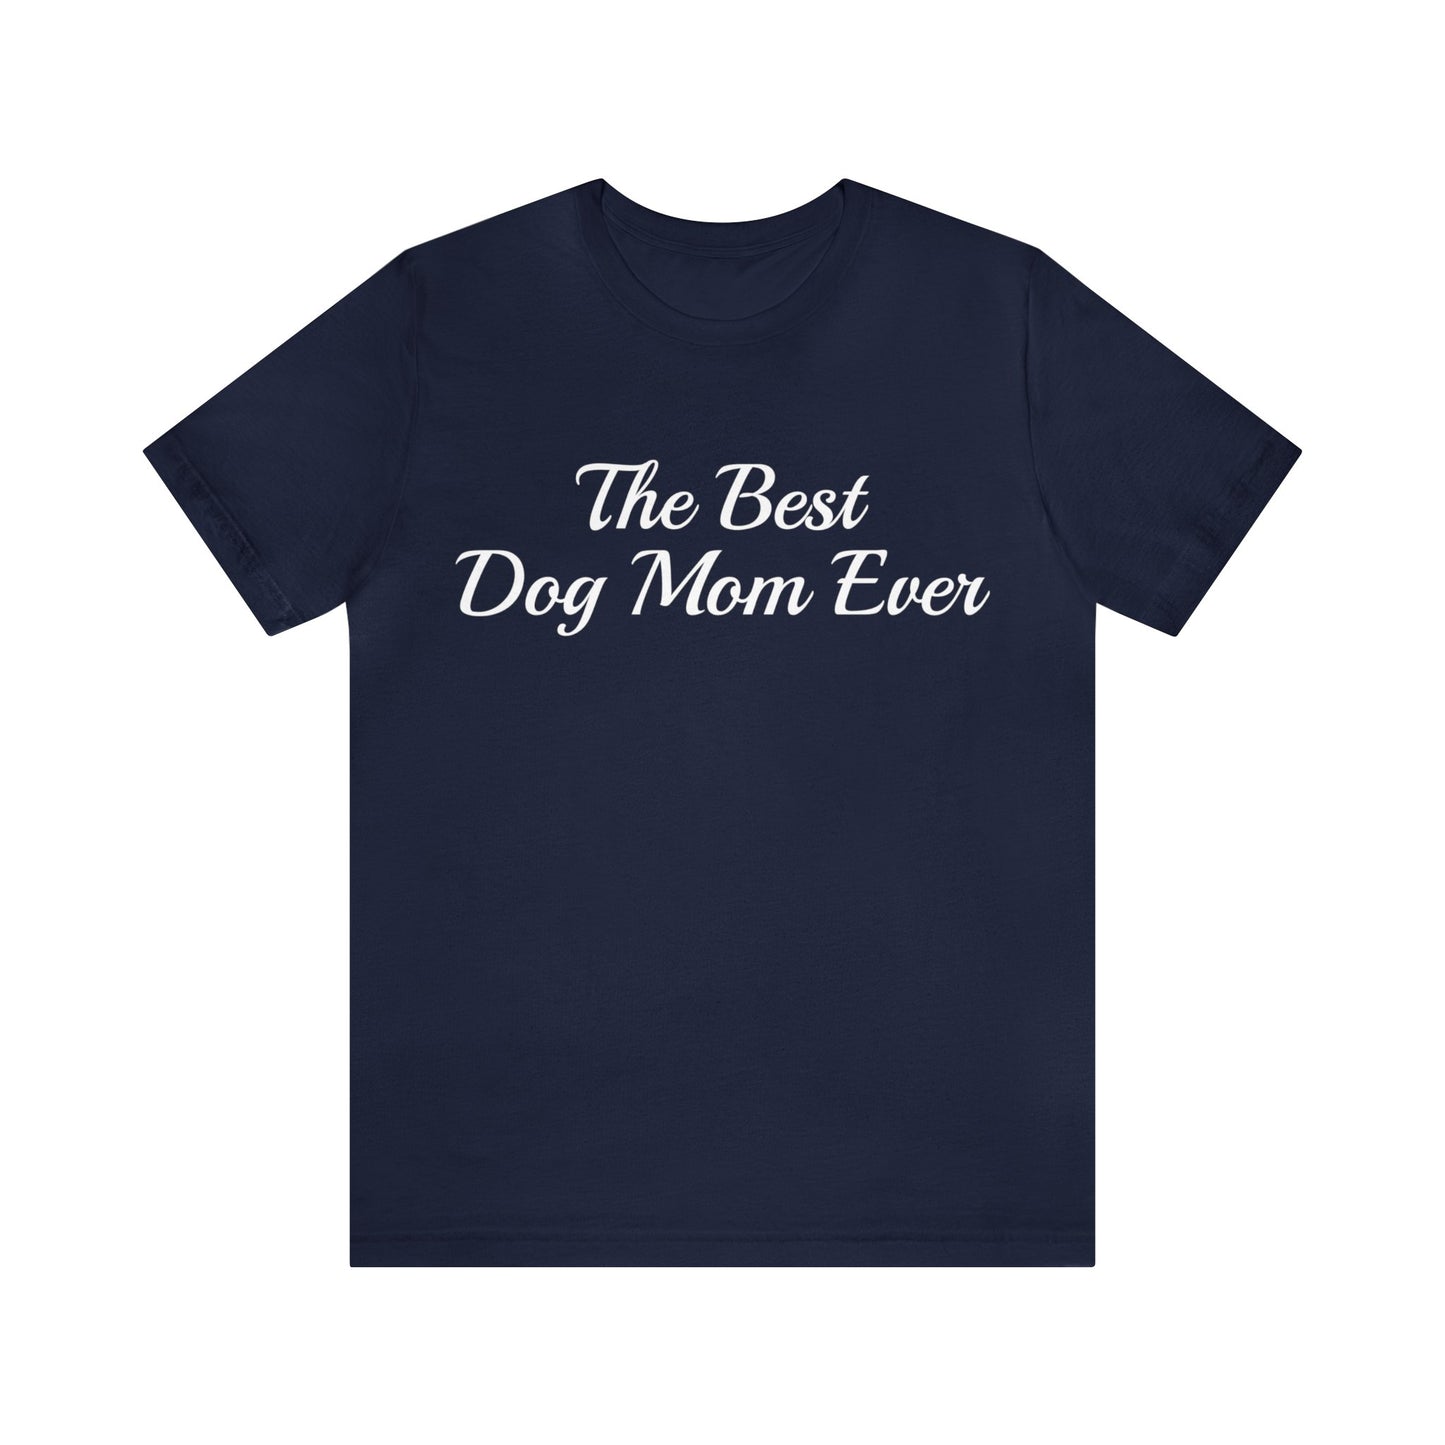 Navy T-Shirt Tshirt Design Gift for Friend and Family Short Sleeved Shirt for Dog Lovers Petrova Designs